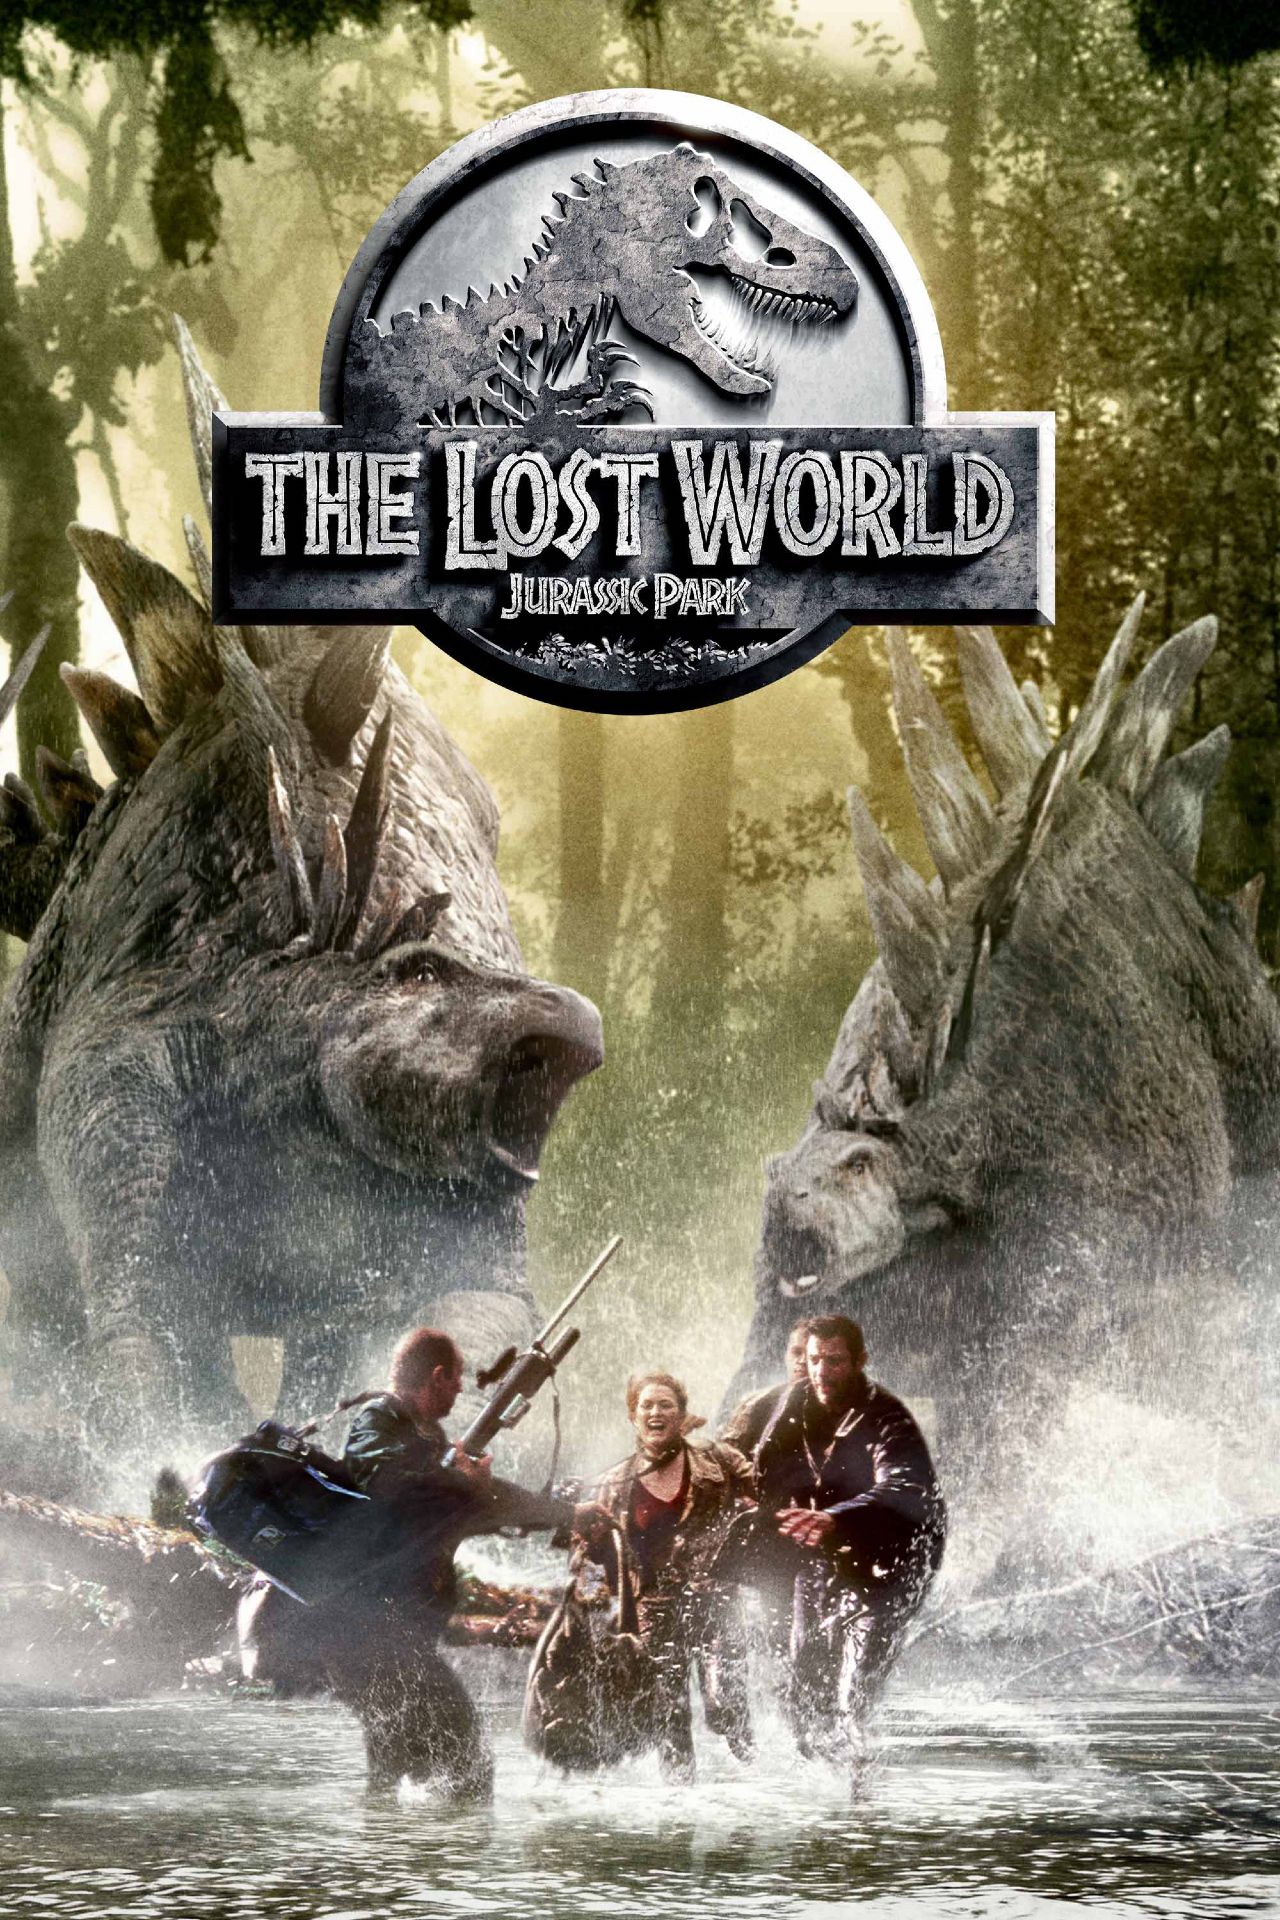 The Lost World Jurassic Park Movie Poster